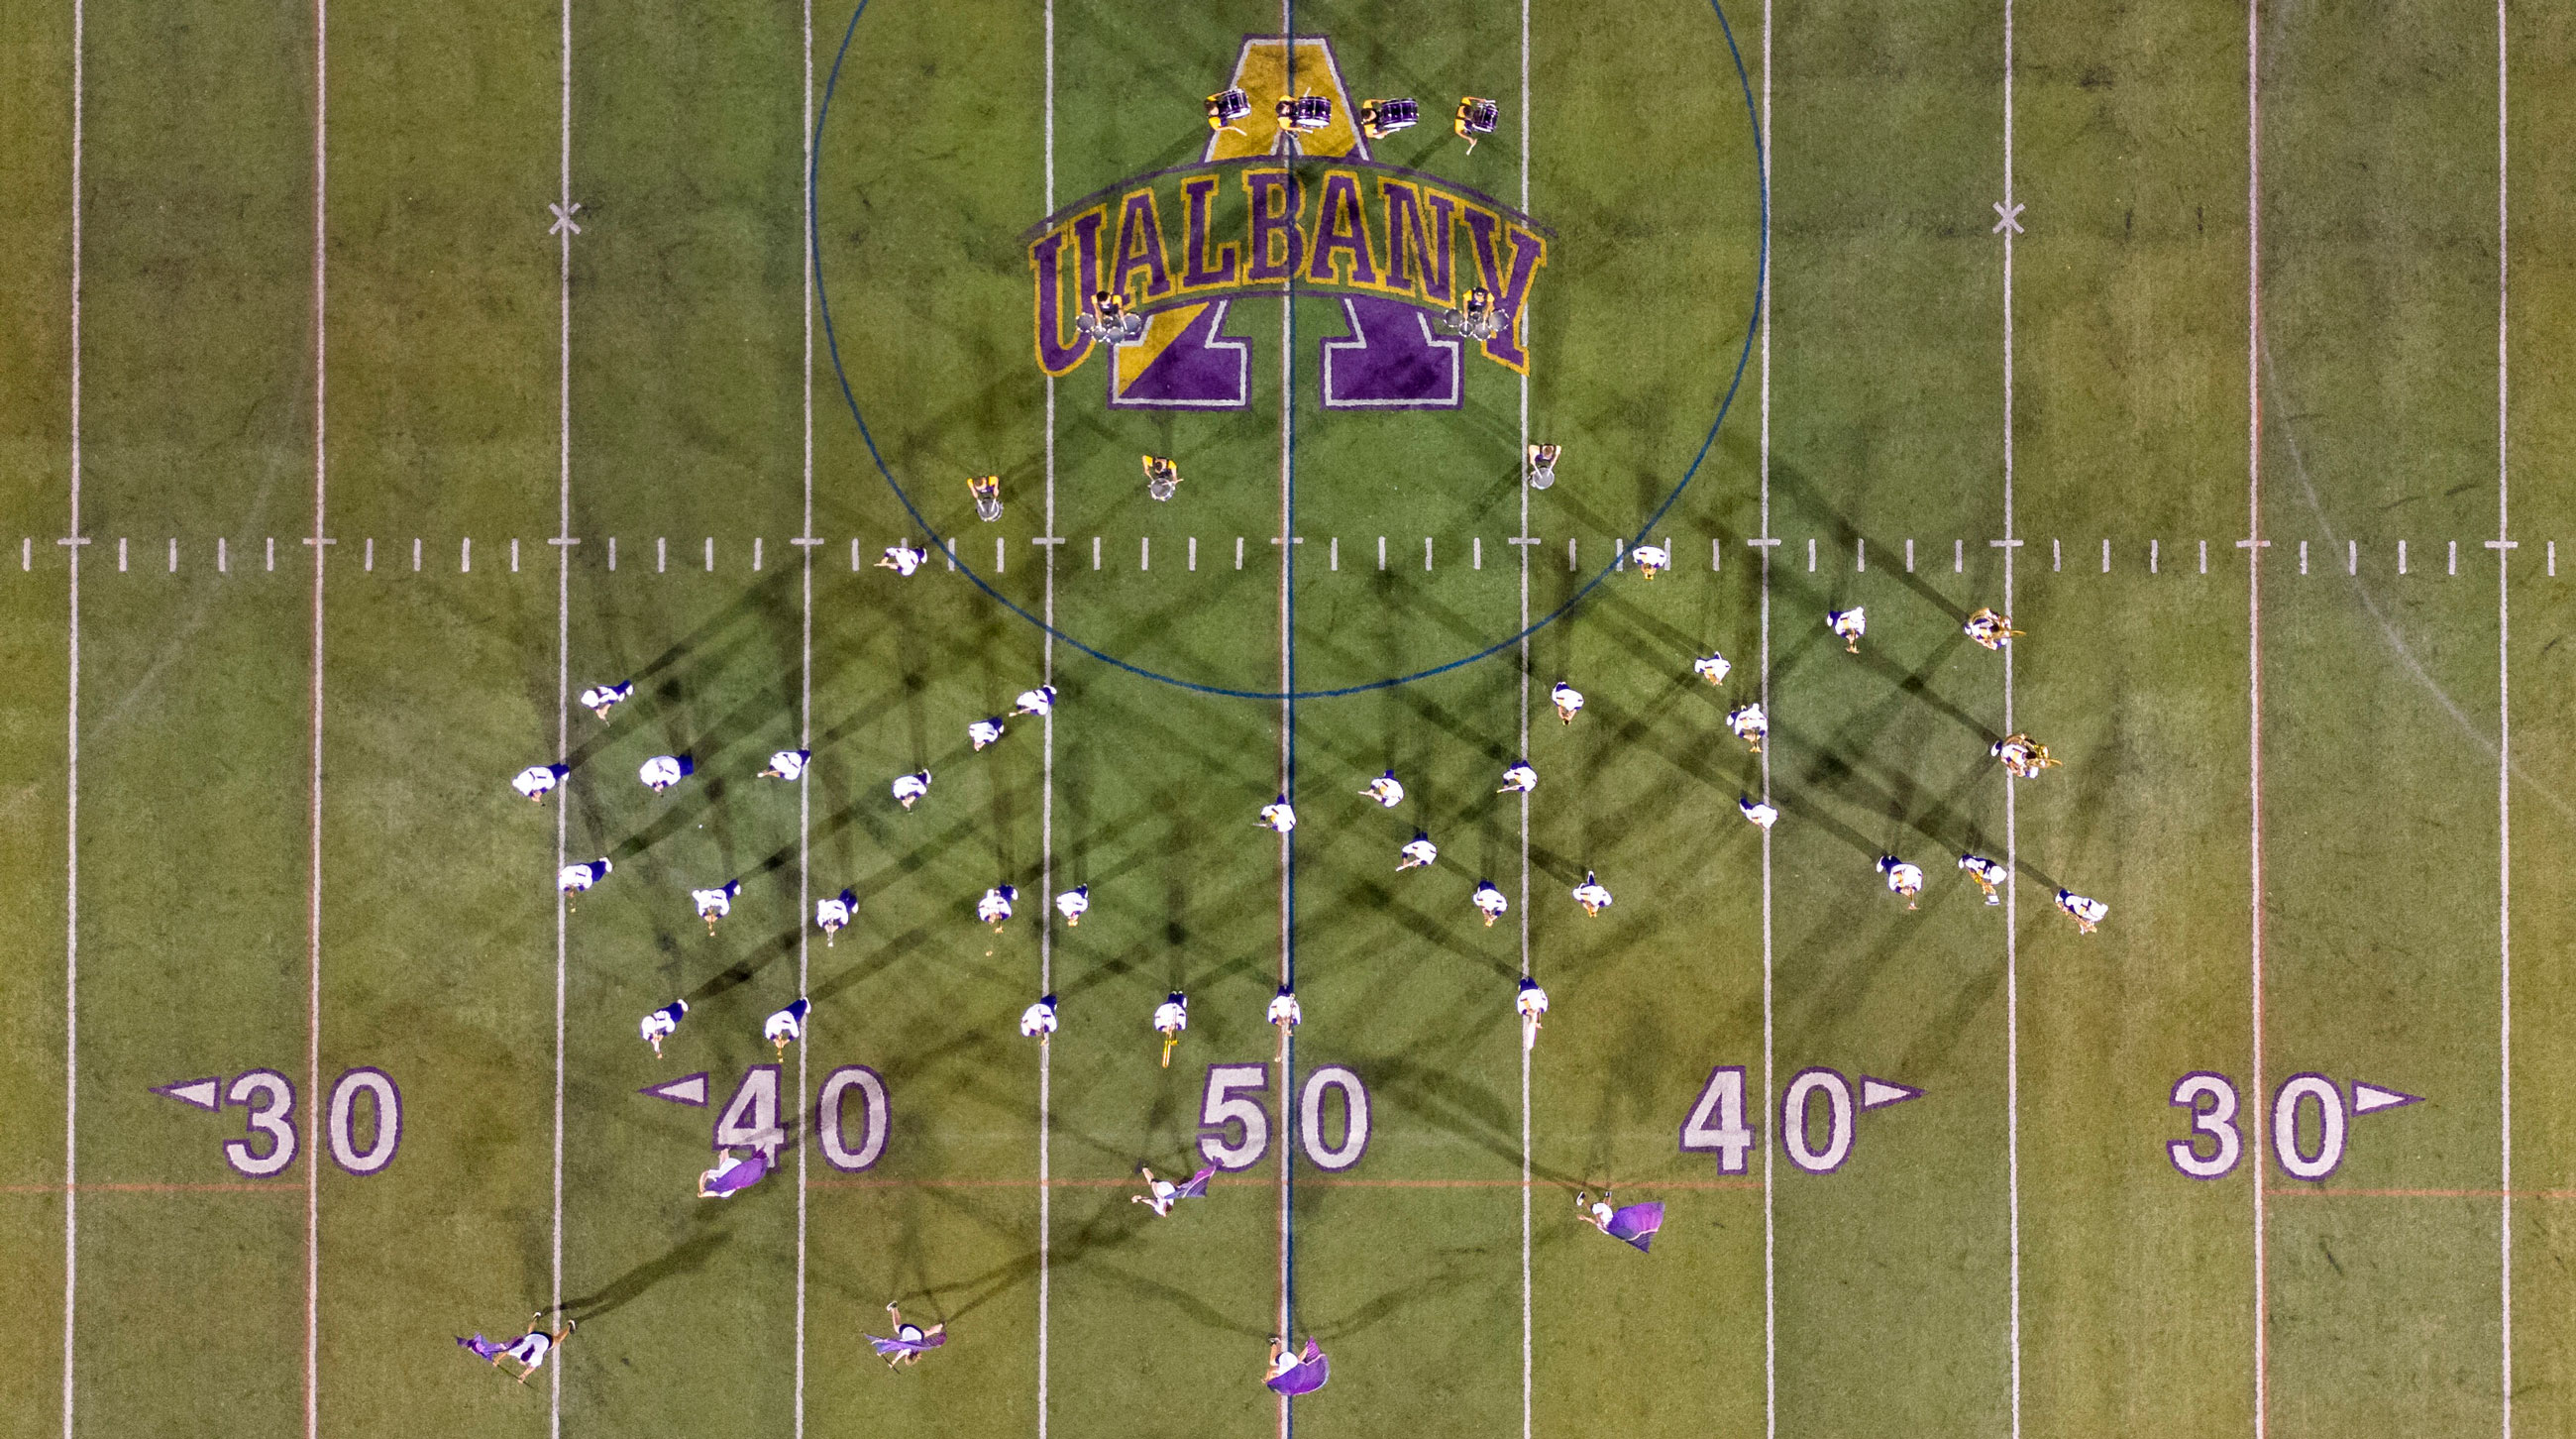 The Marching Great Danes perform on the UAlbany turf, as seen from above from a drone.